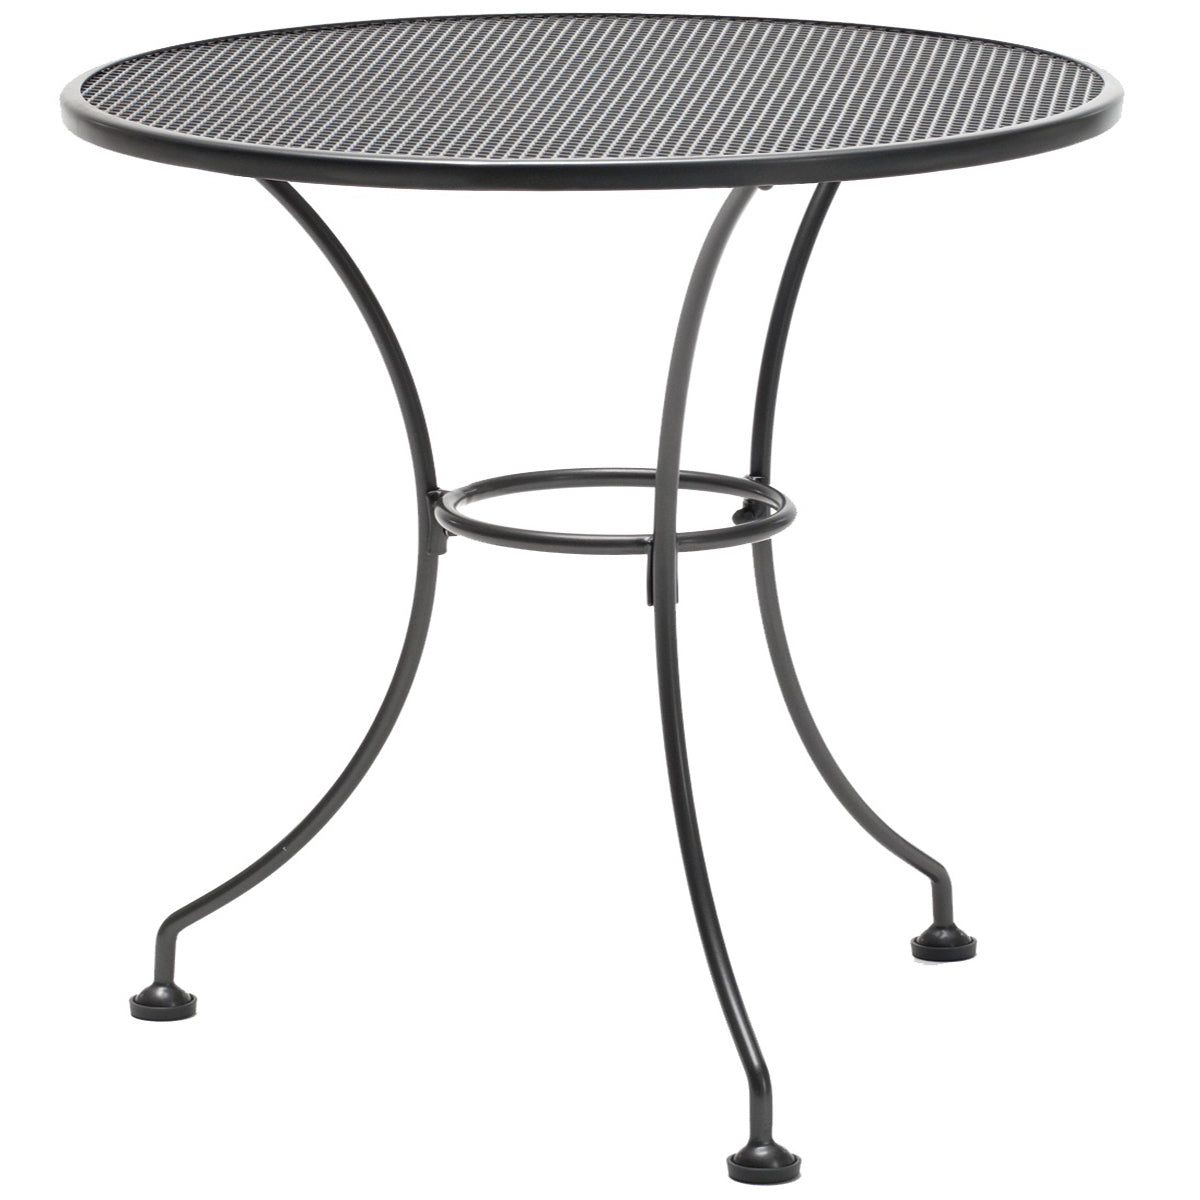 28" Round Mesh Top Table